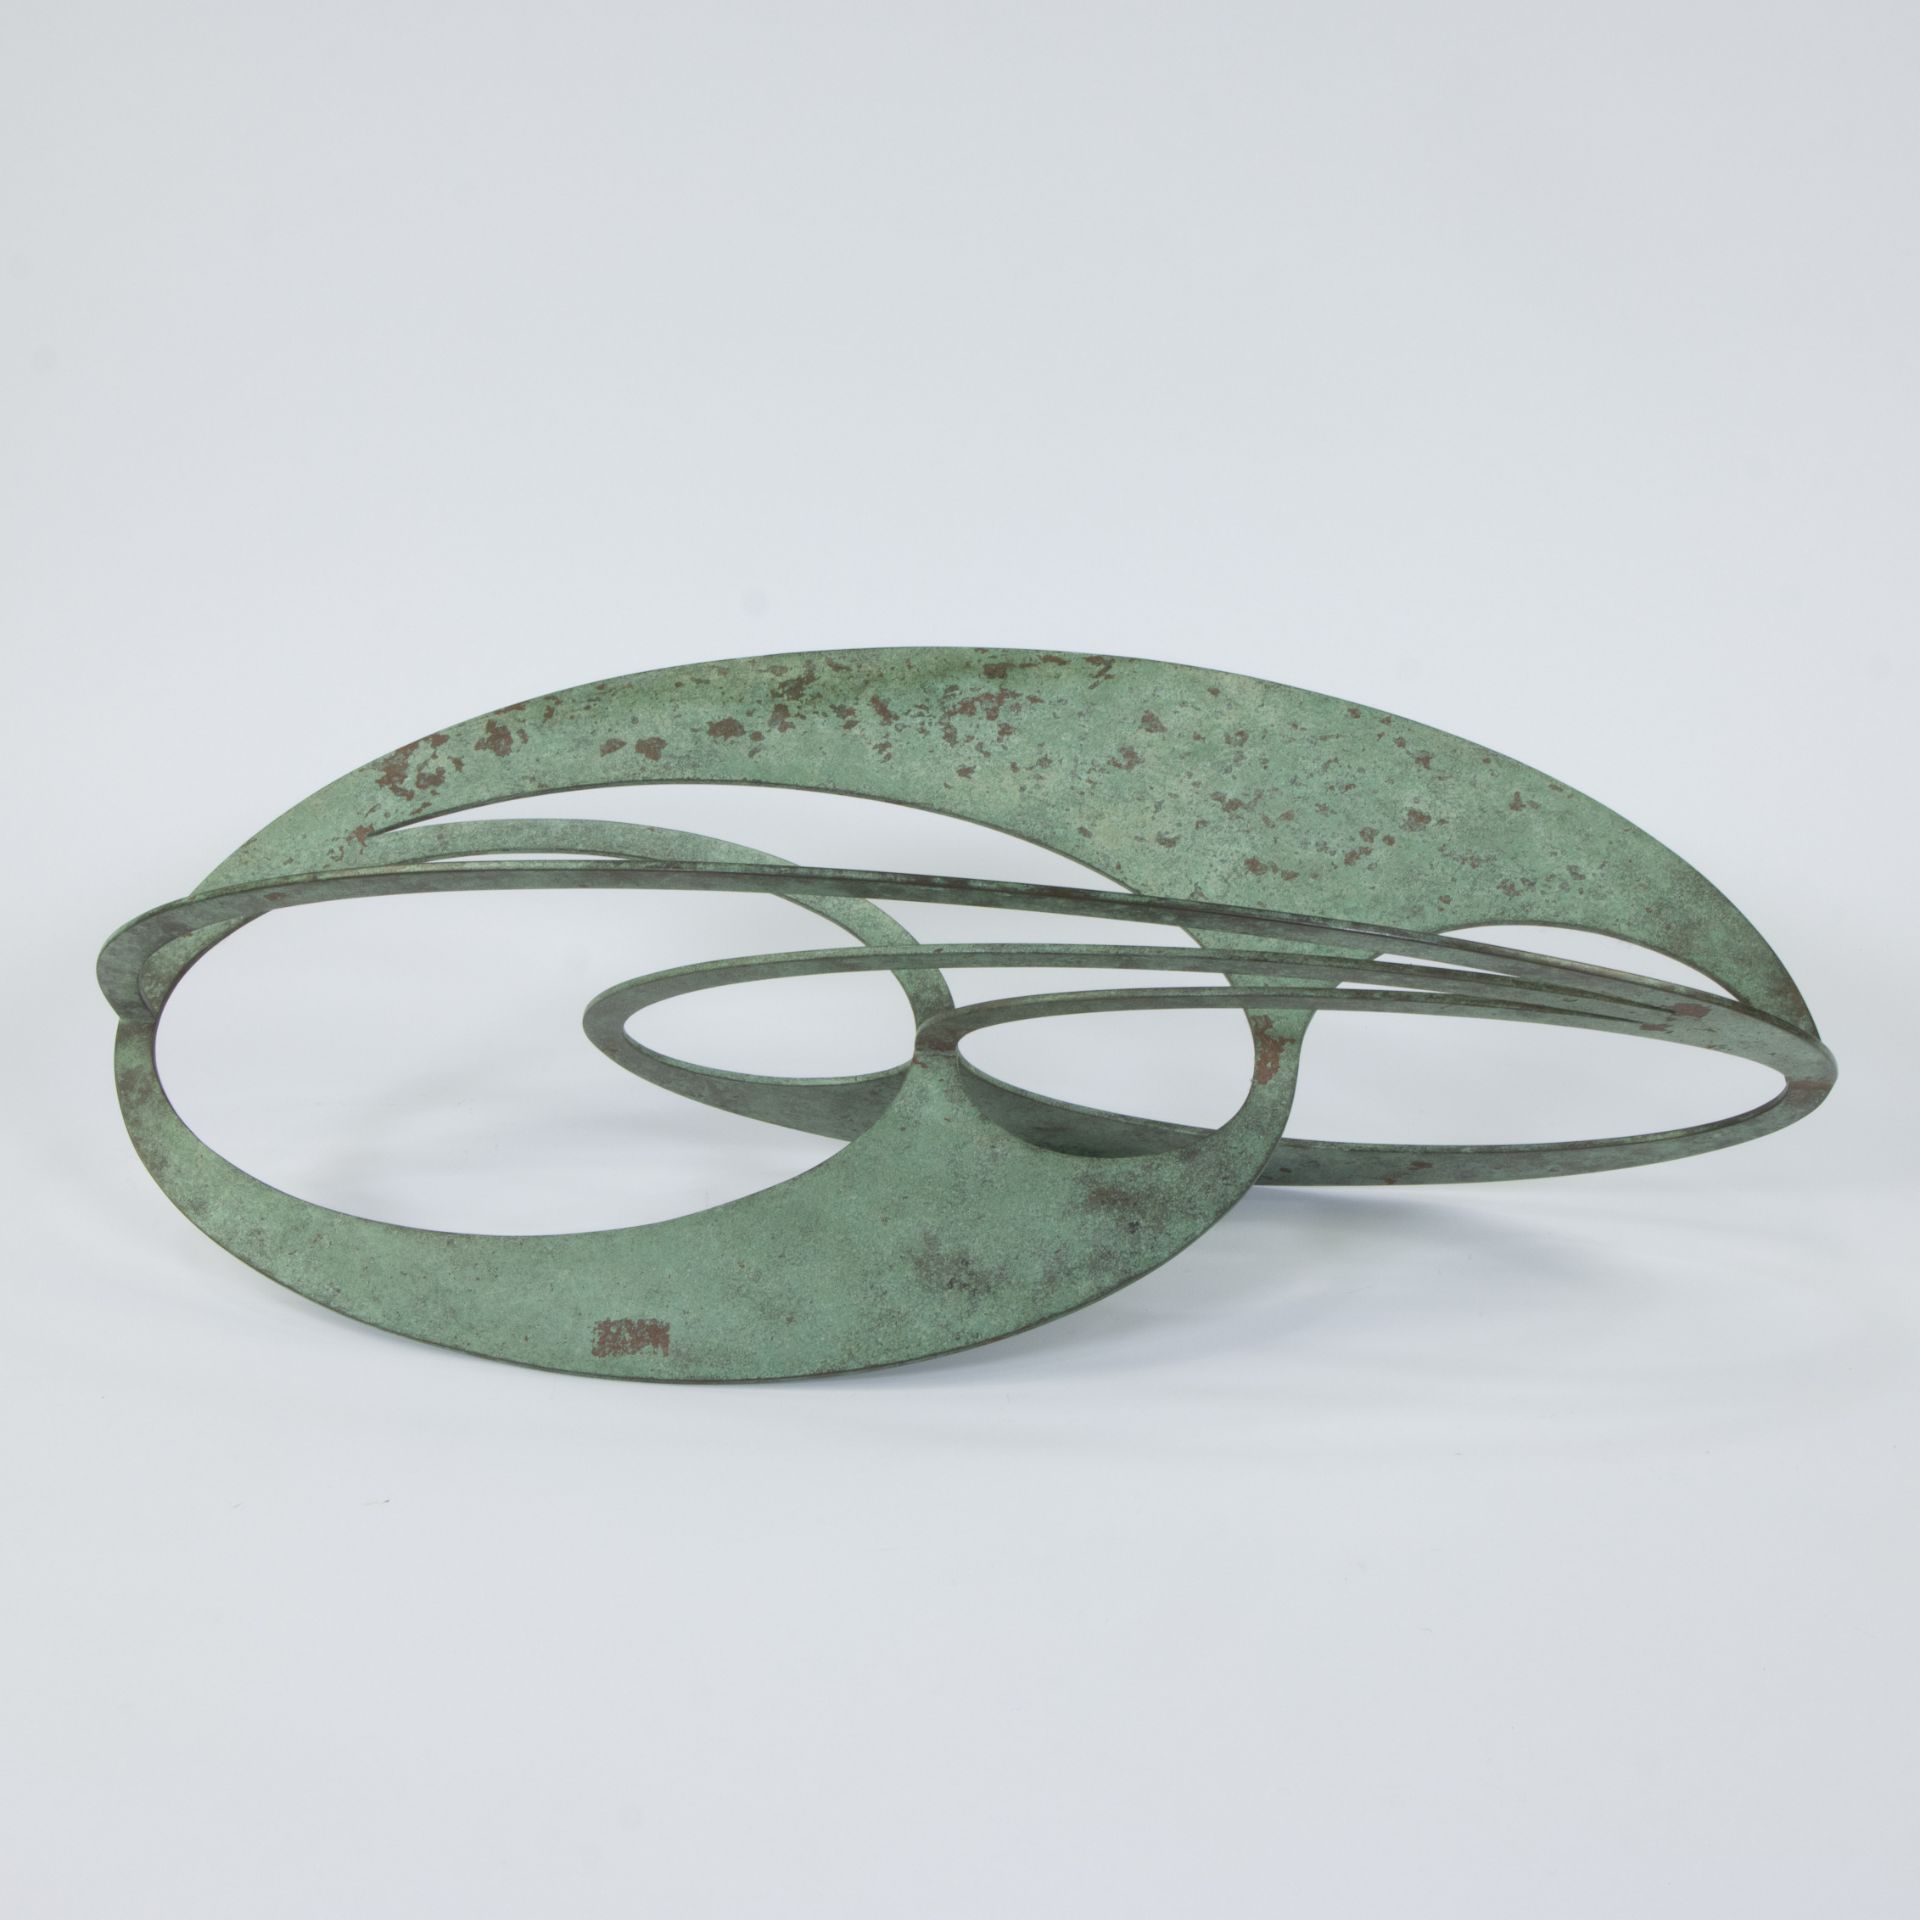 Nigel HALL (1943), metal sculpture Giving and Receiving 1986, not signed - Image 4 of 5